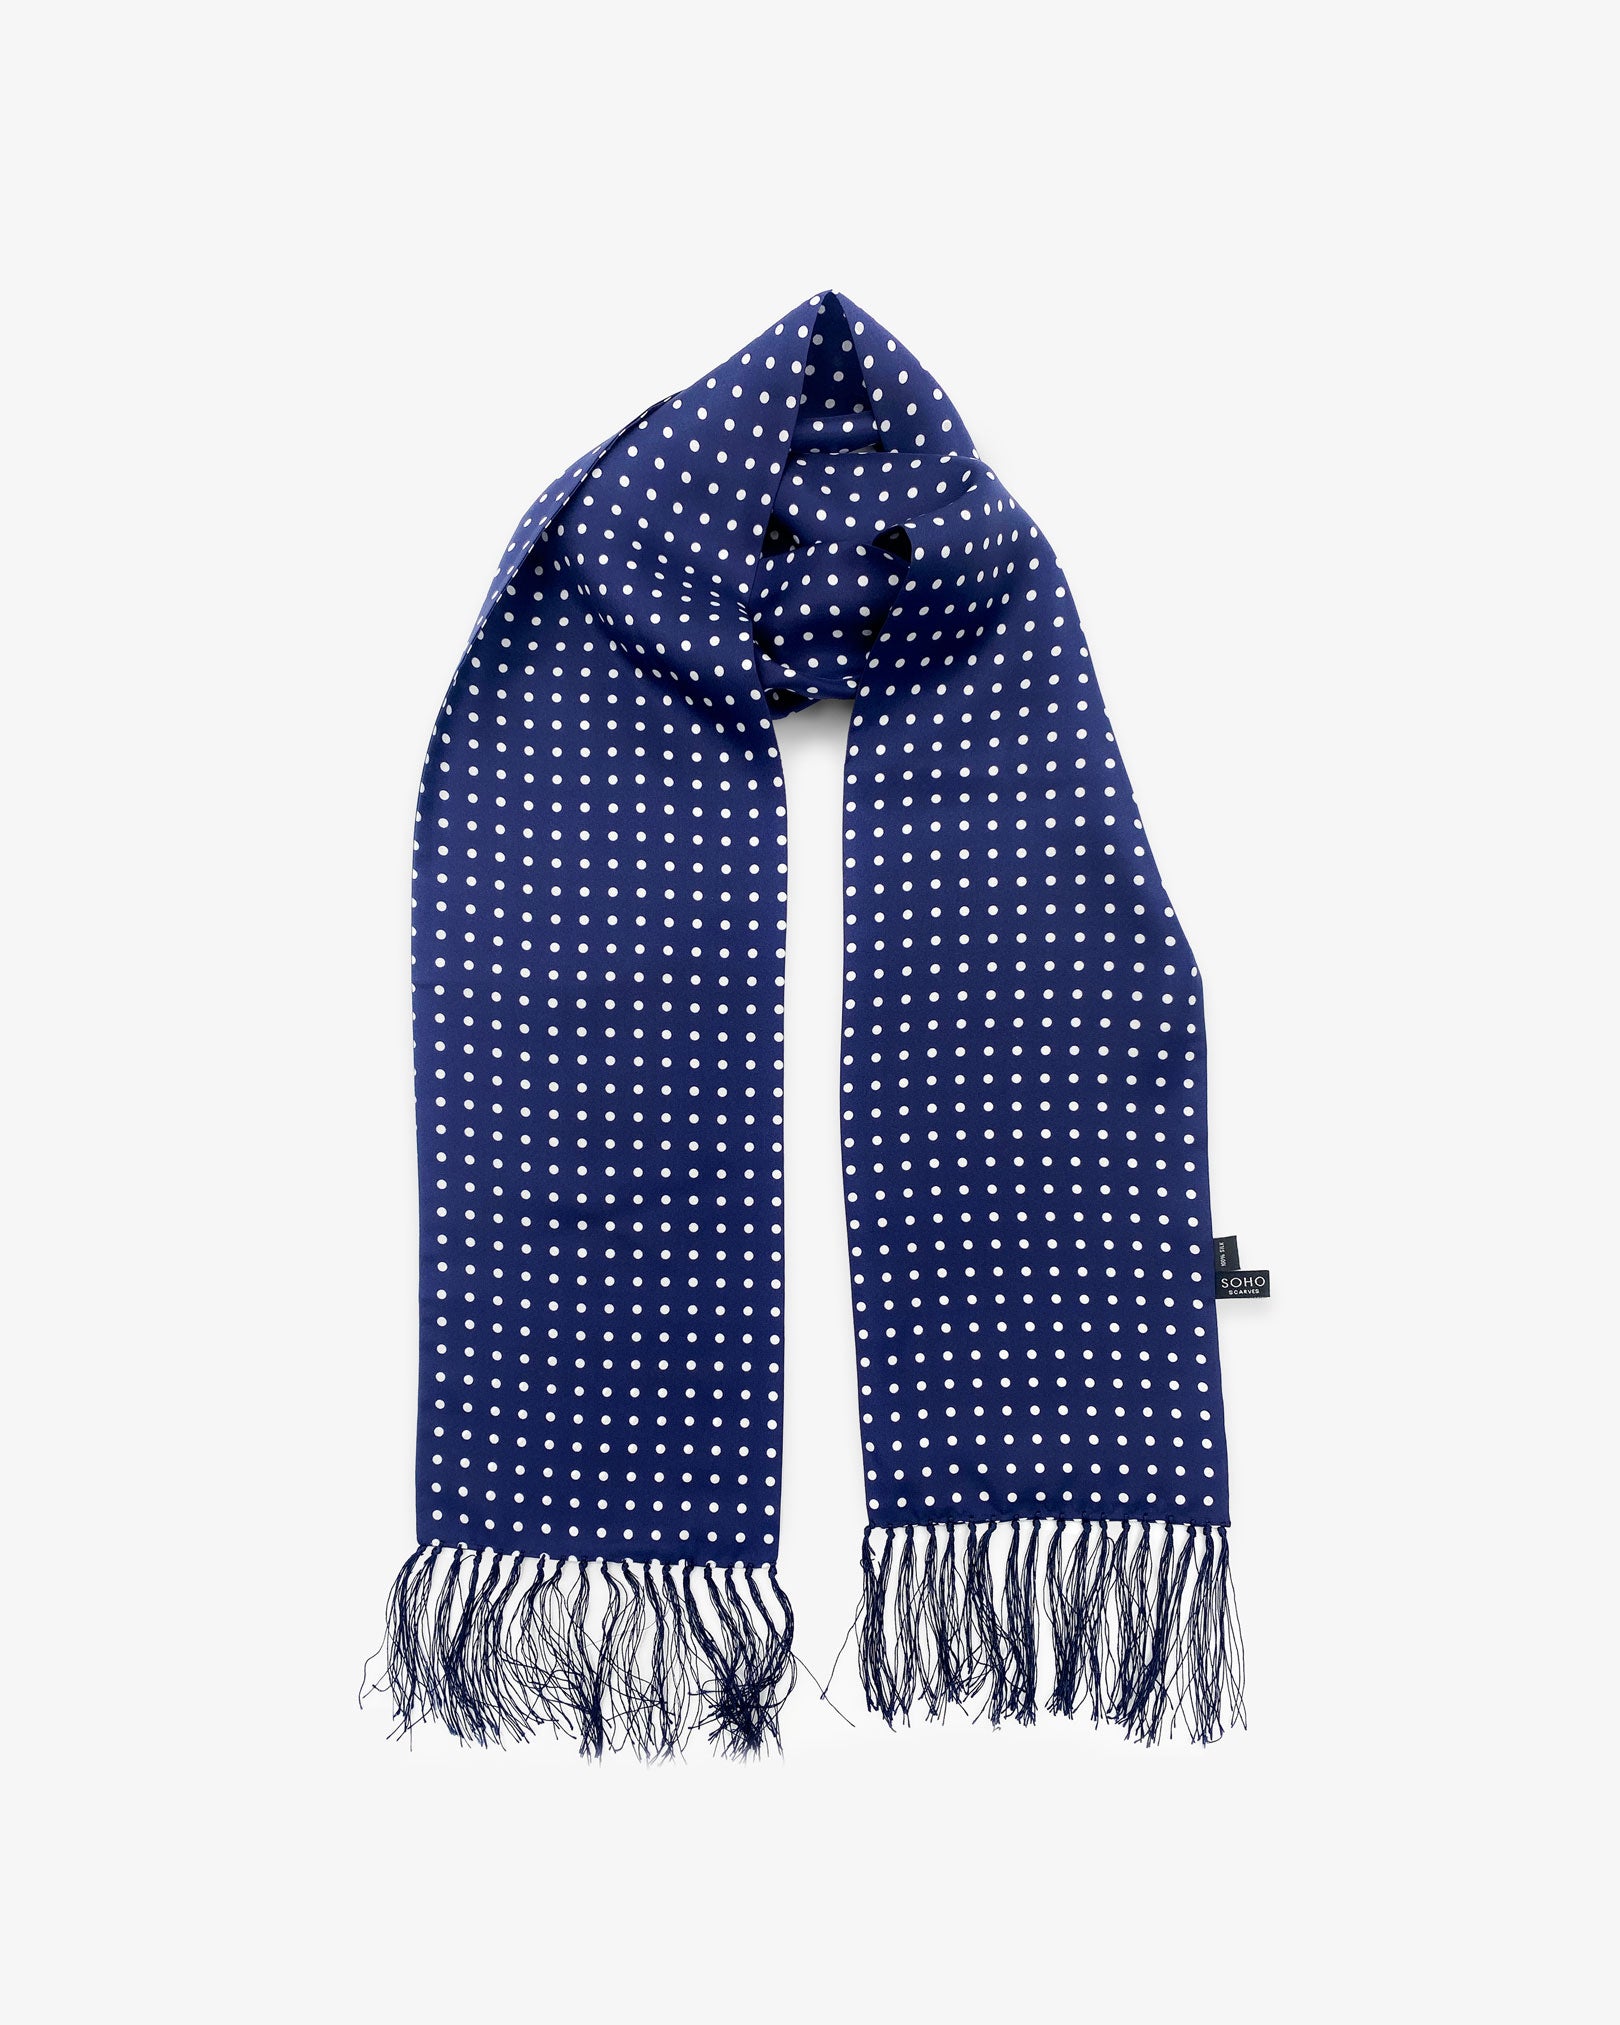 Looped view of the 'Westminster' silk aviator scarf, clearly showing the timeless polka dot design in navy-blue with white spots with matching 3-inch fringe.